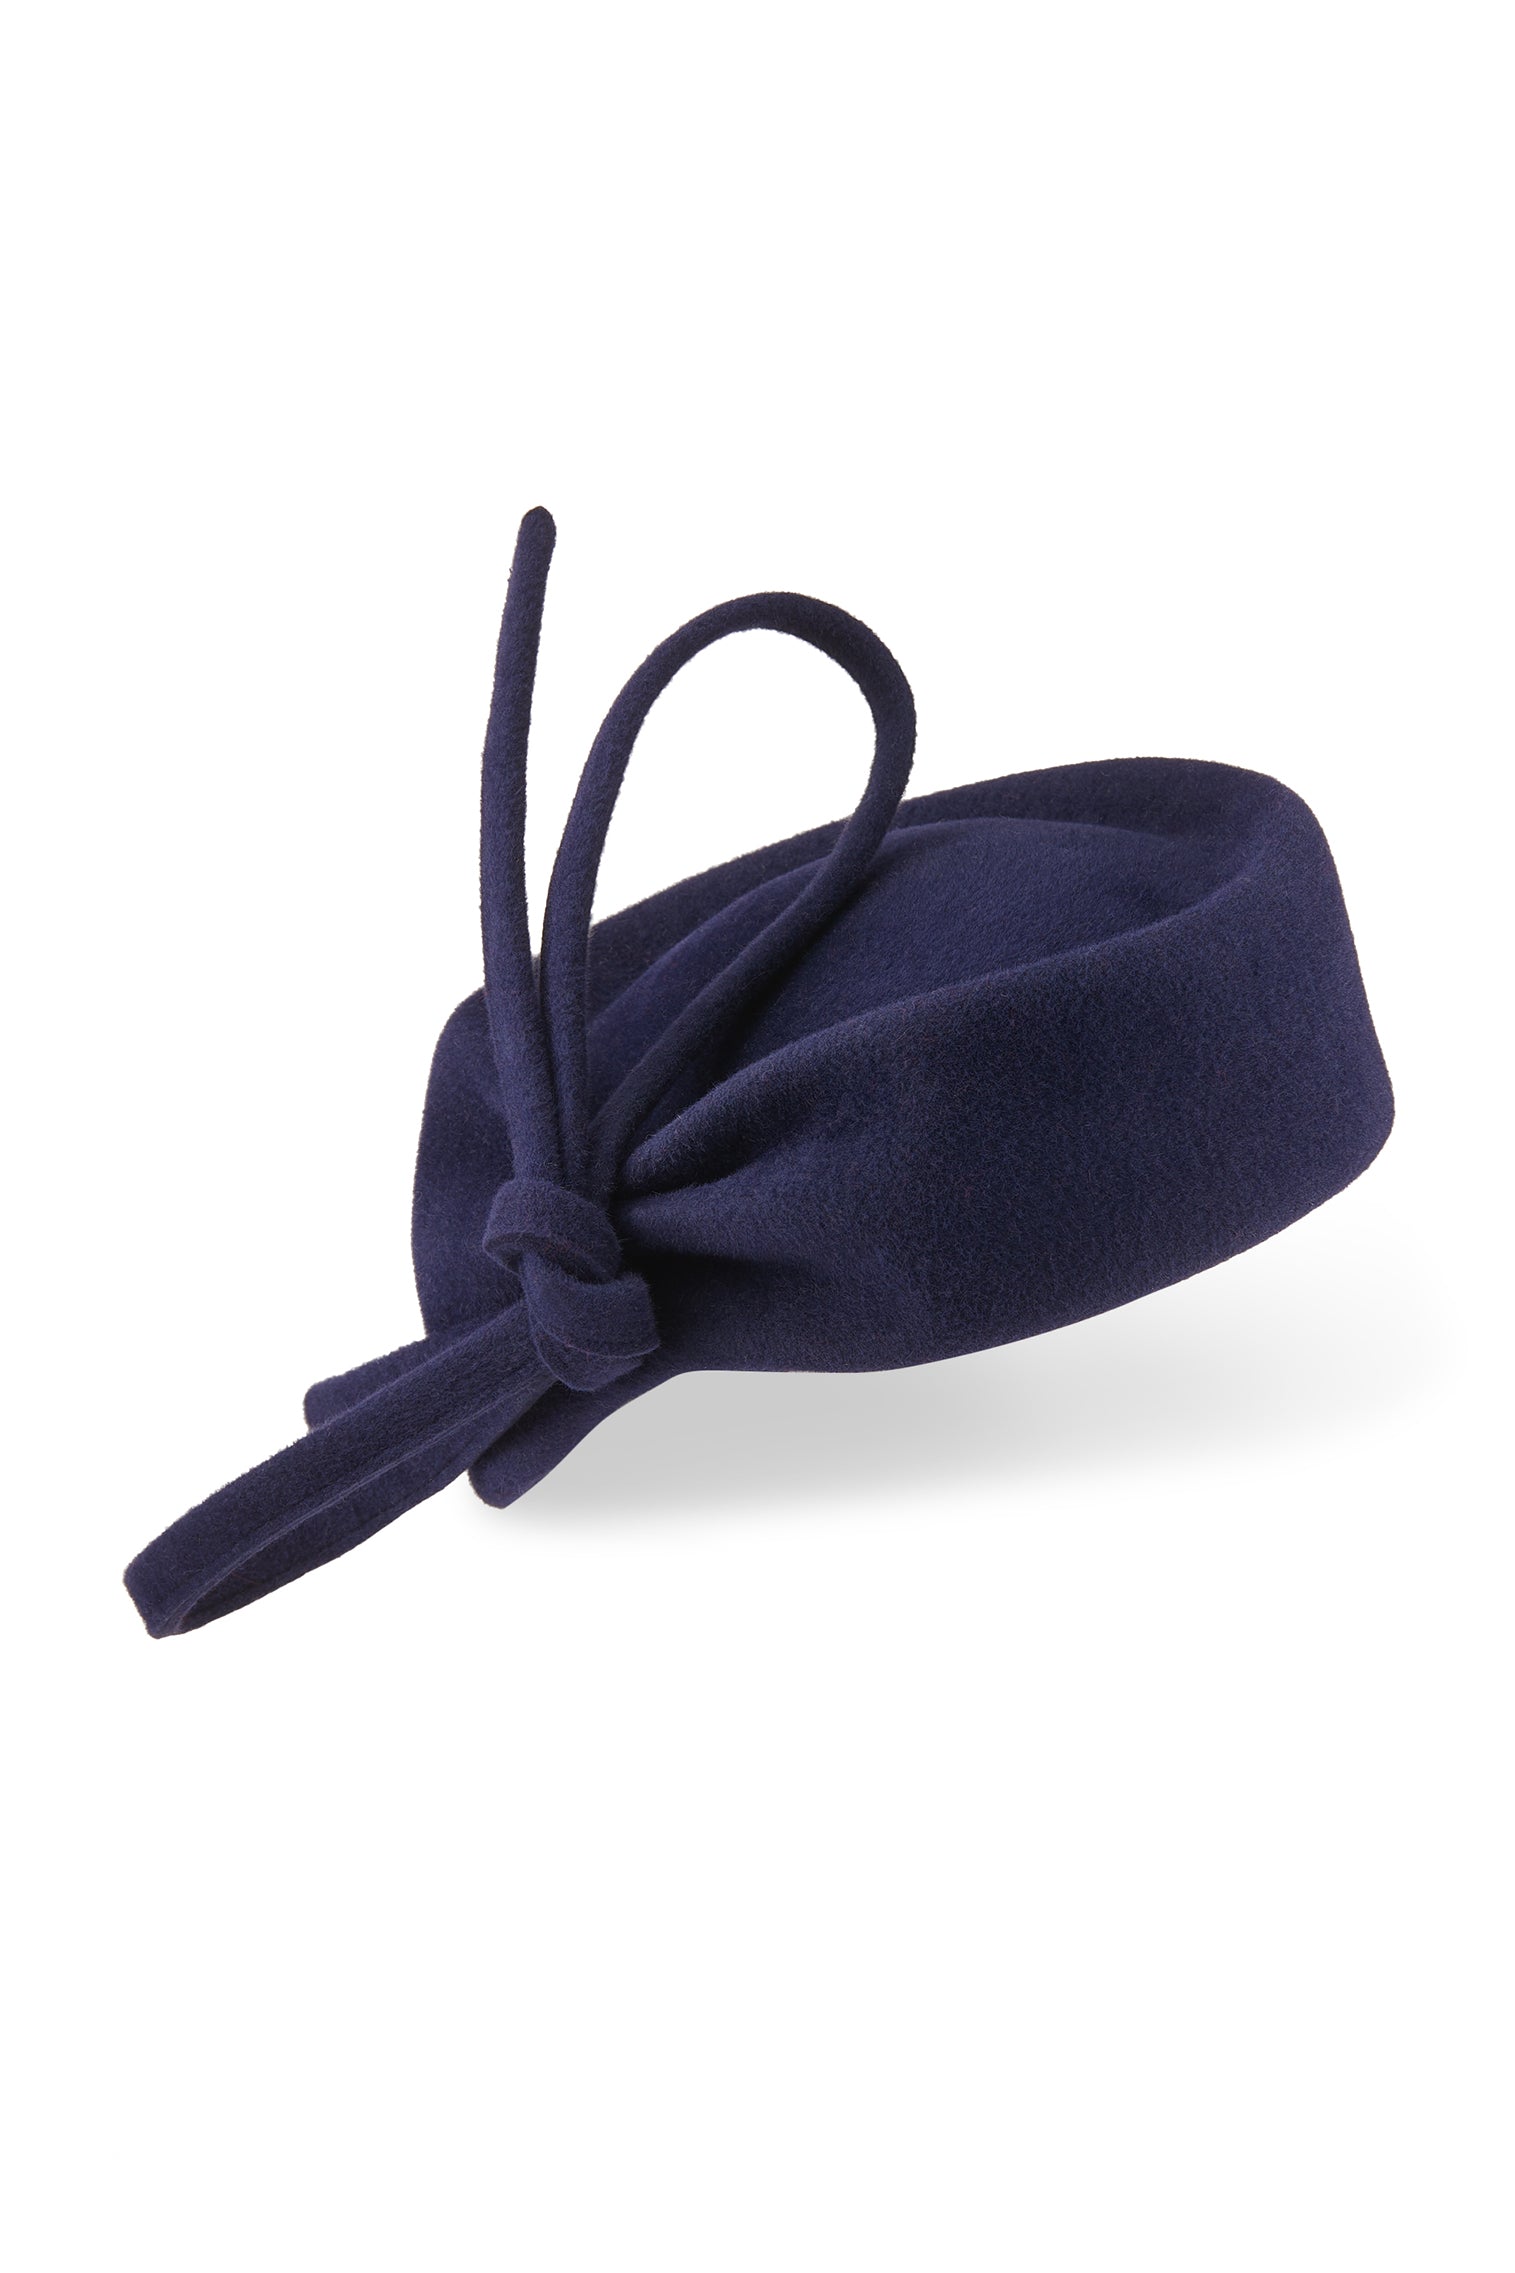 Mayfair Navy Pillbox Hat - Products - Lock & Co. Hatters London UK